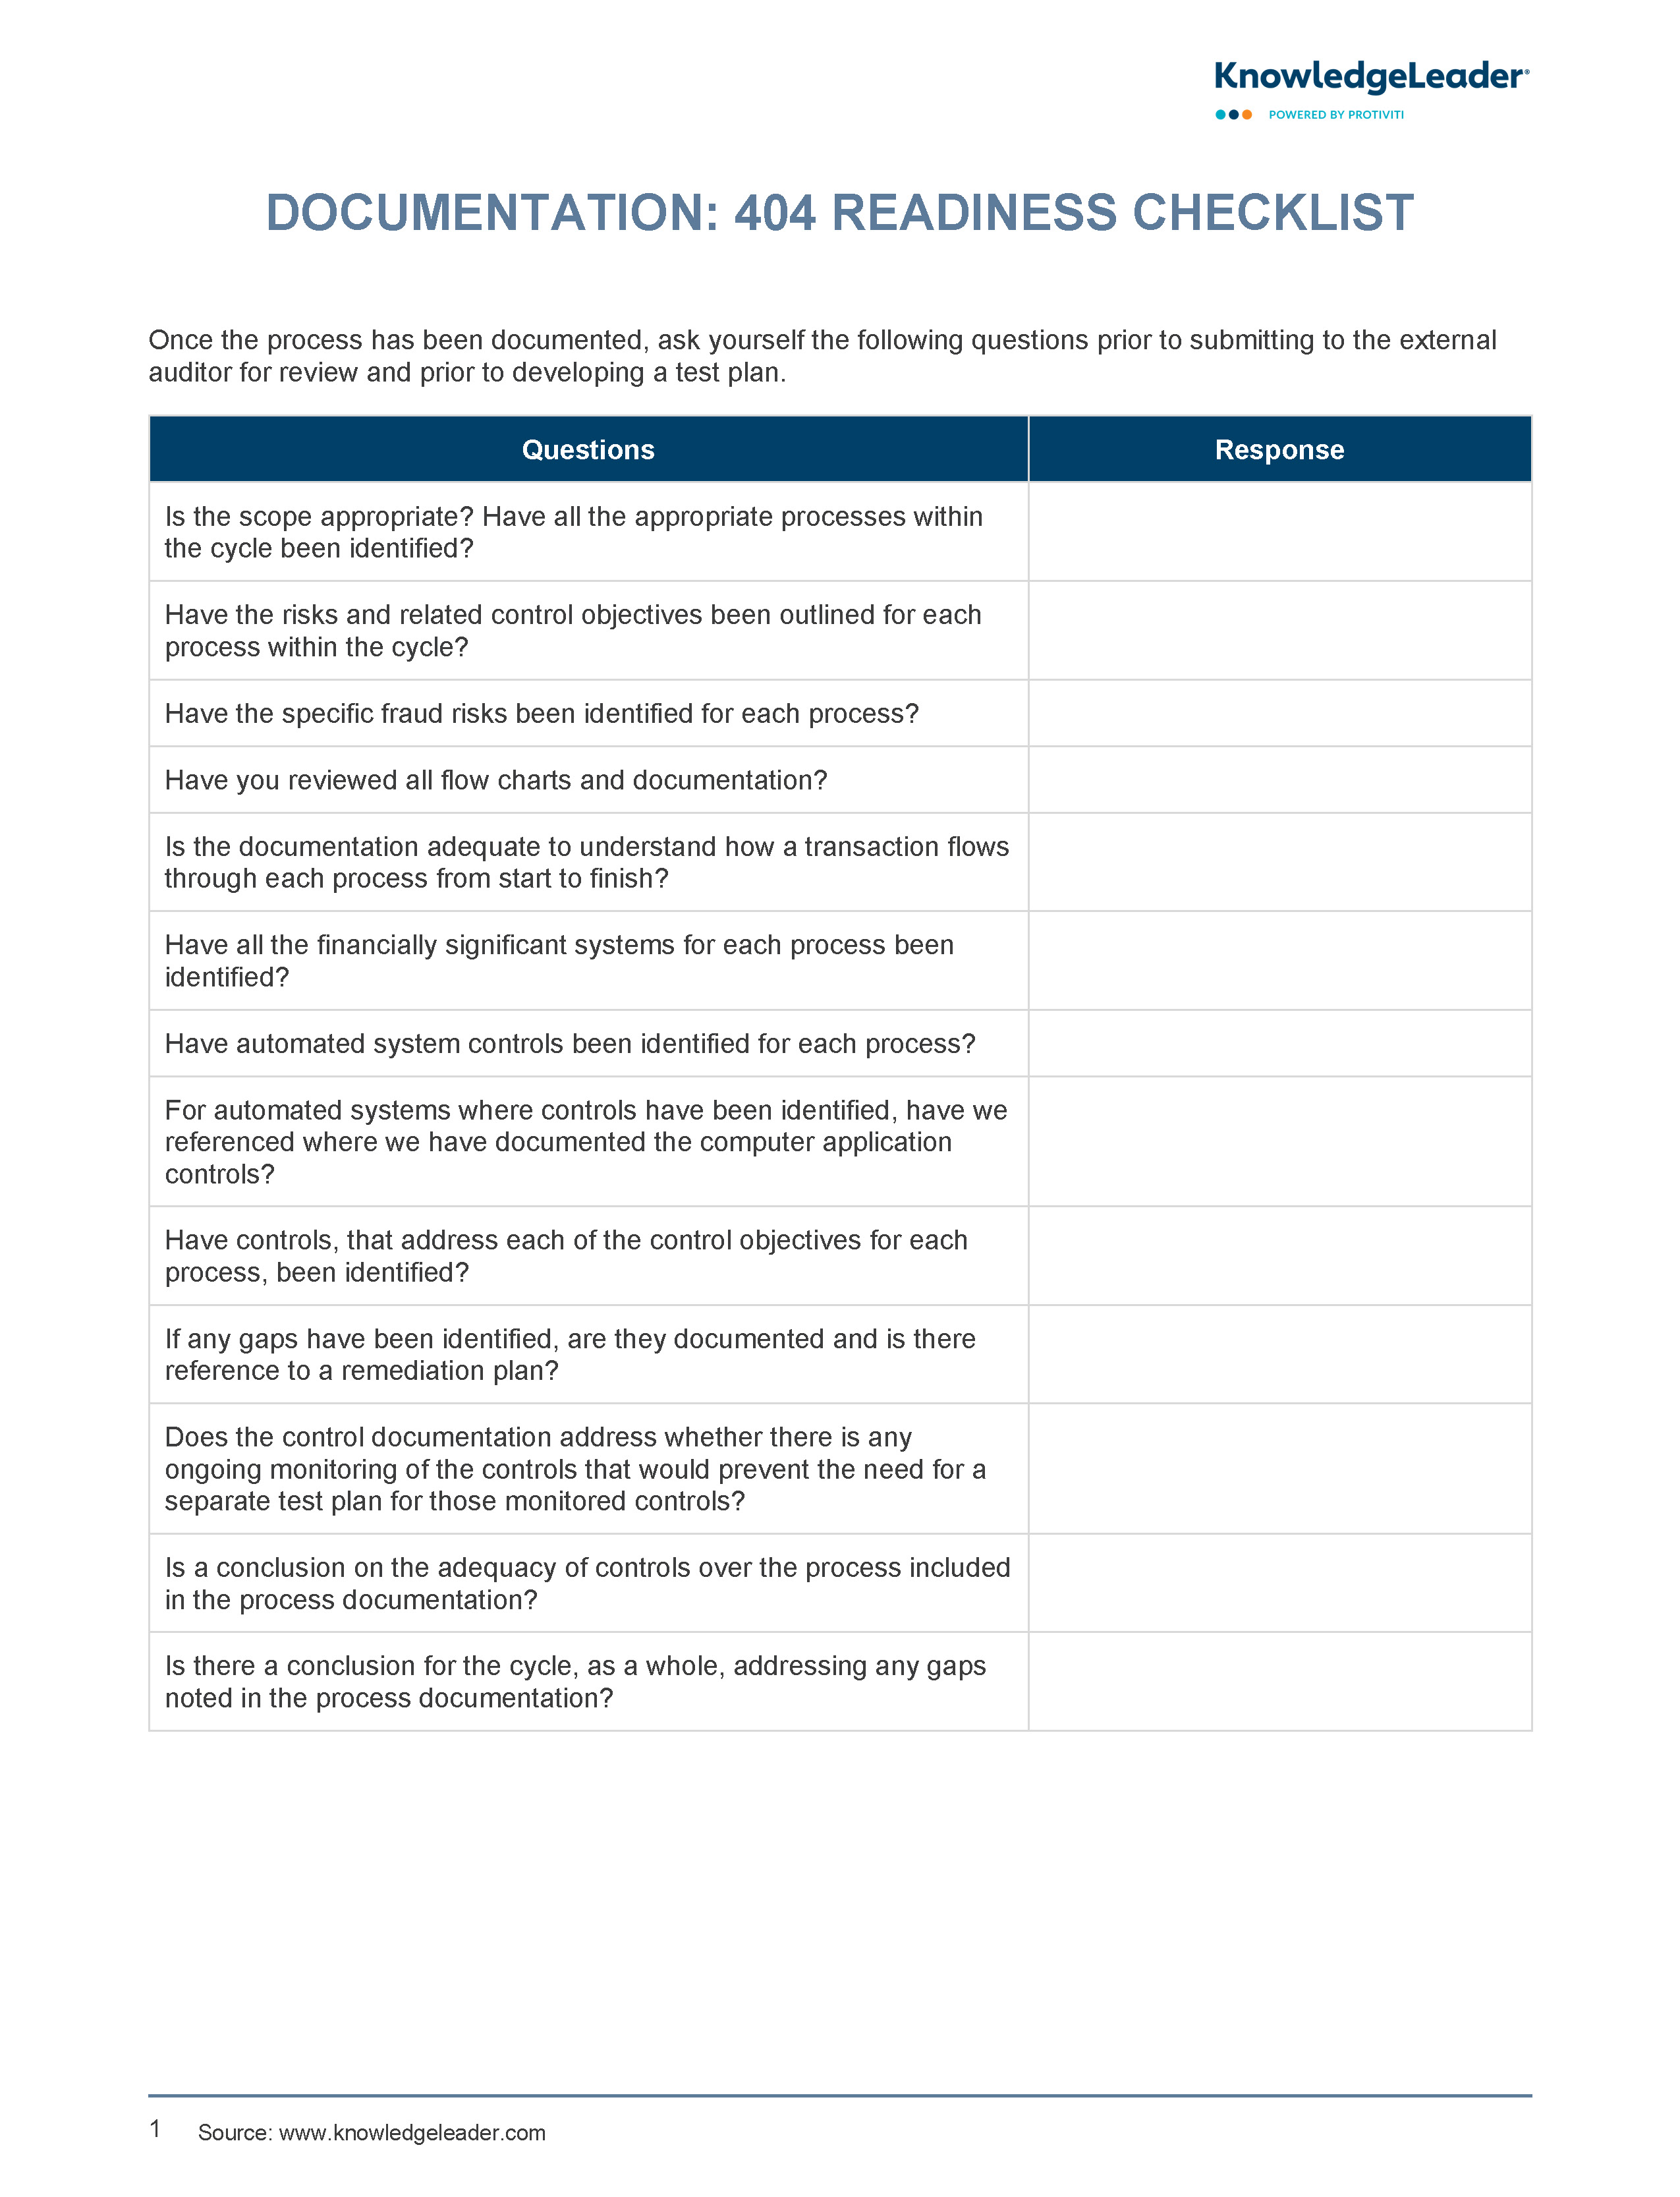 Screenshot of the first page of Documentation - 404 Readiness Checklist